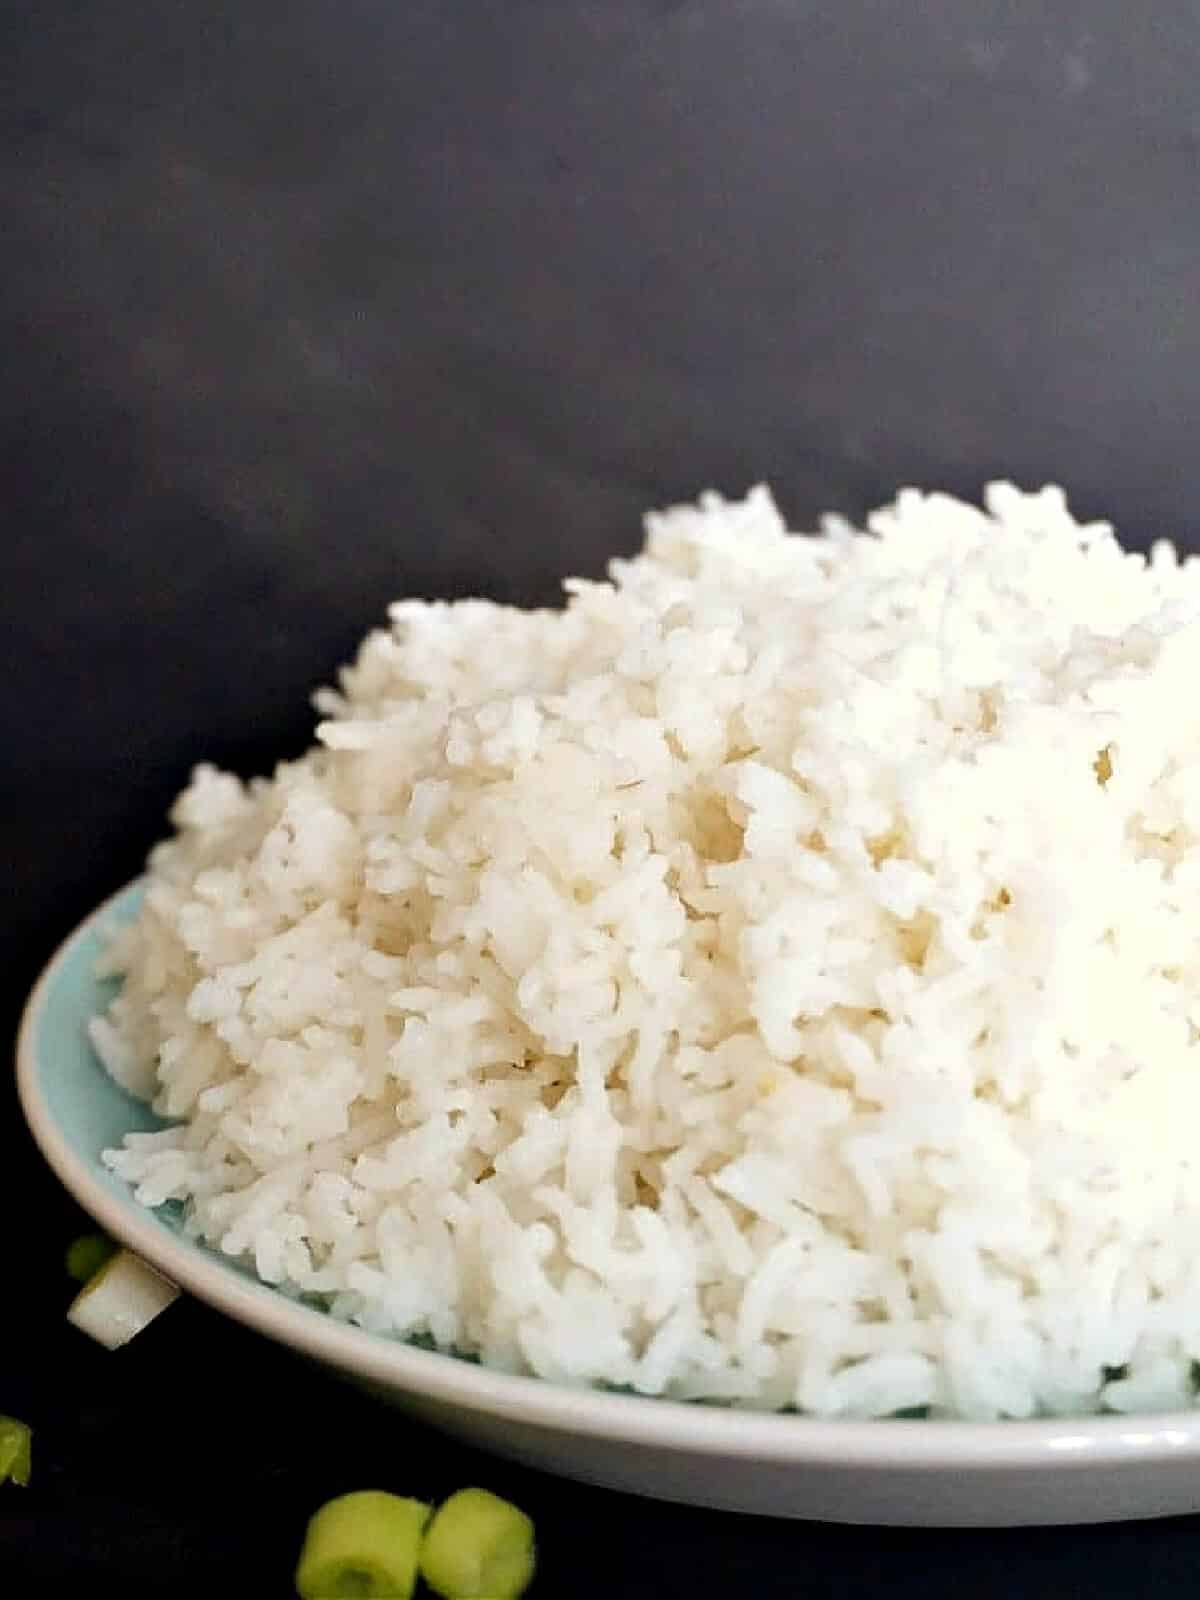 A light blue plate with a pile of basmati rice.